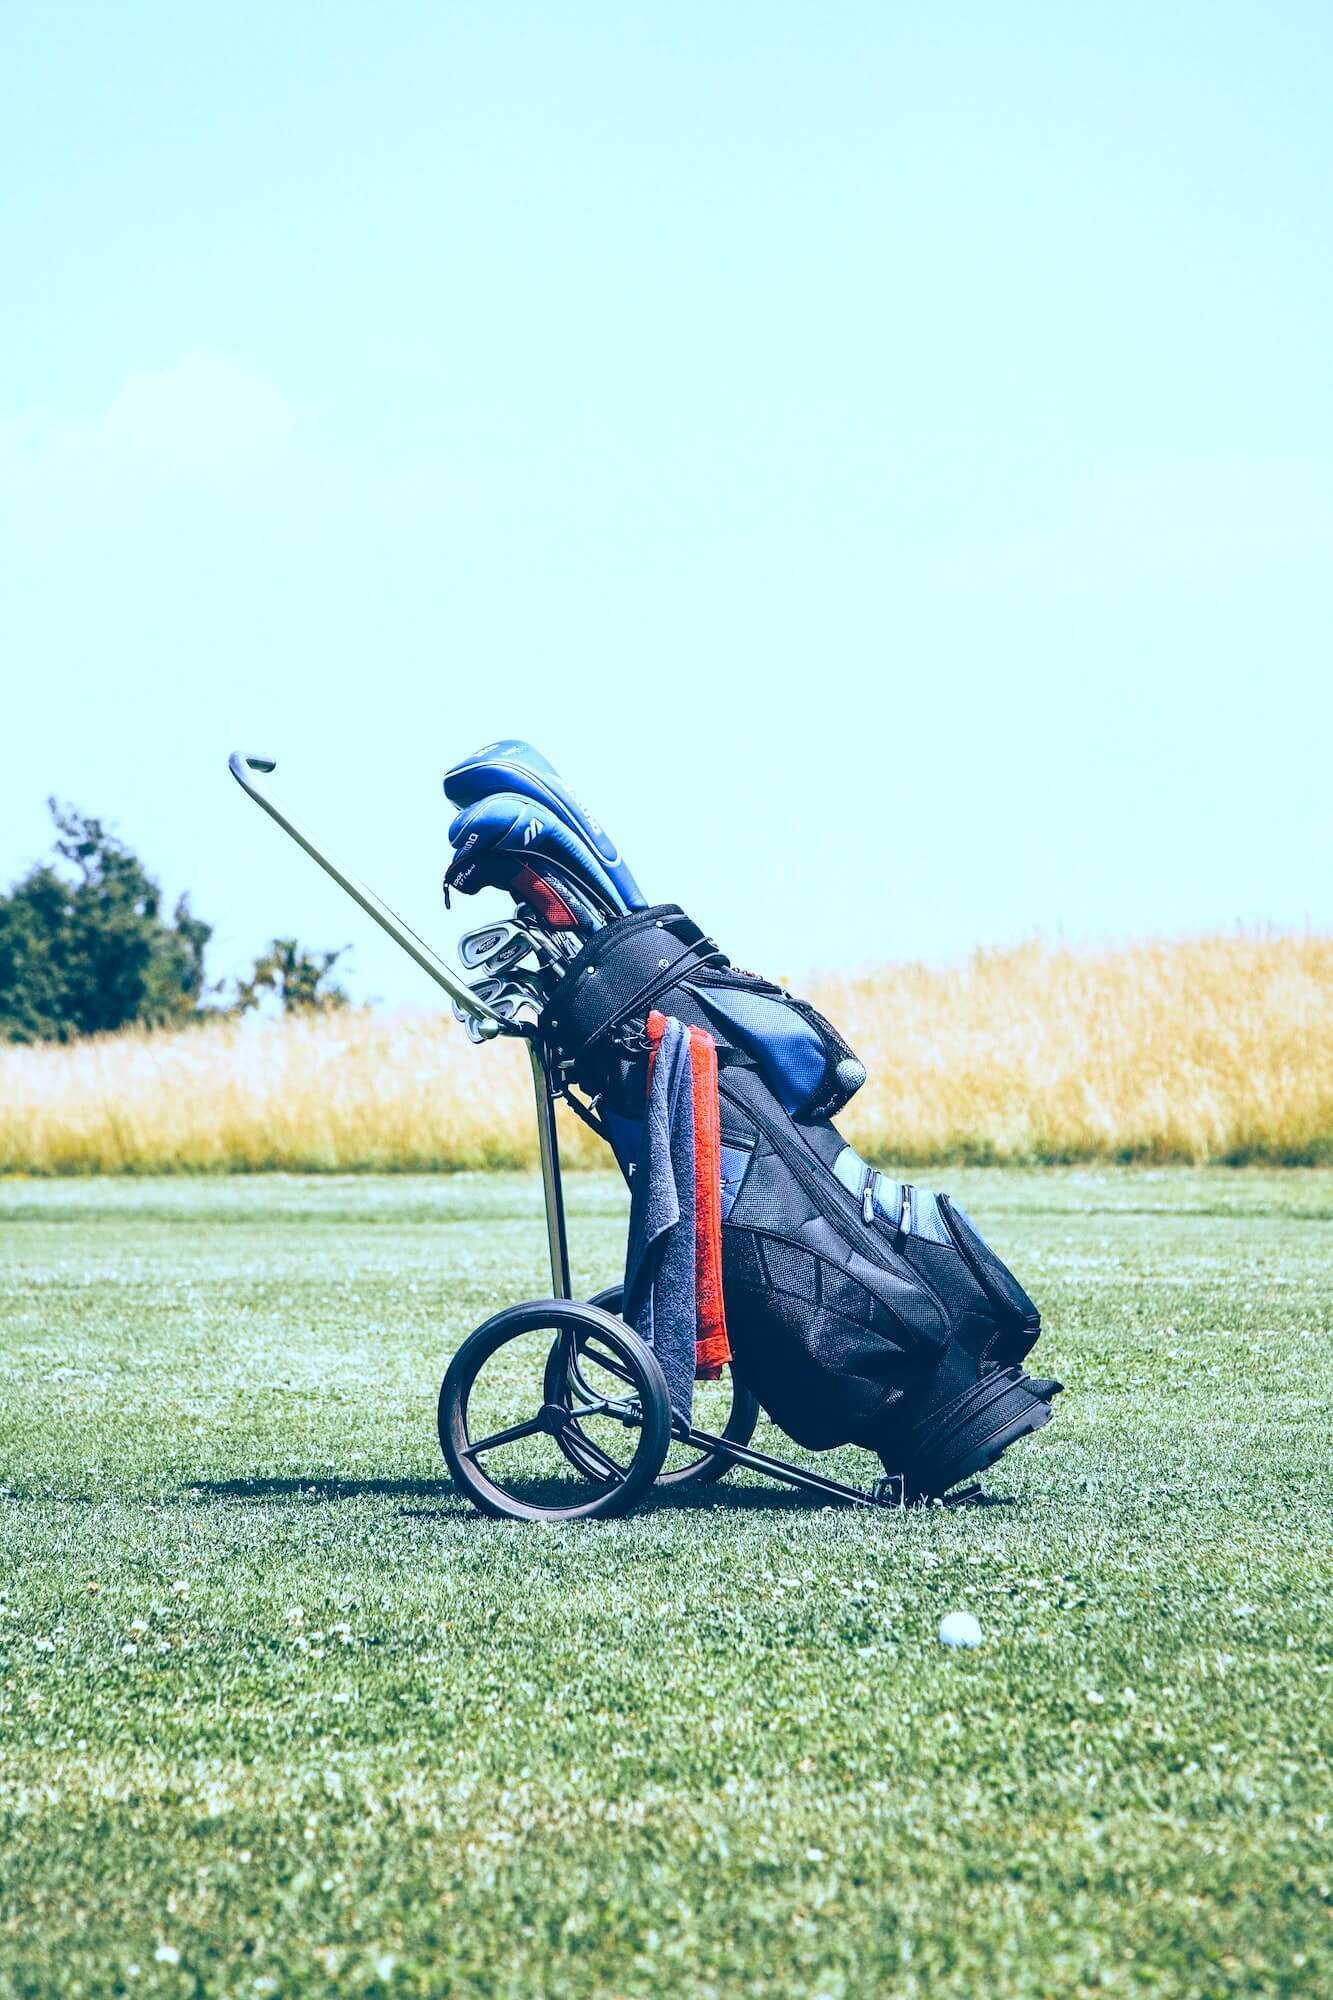 Golf bag and push cart sit on the green